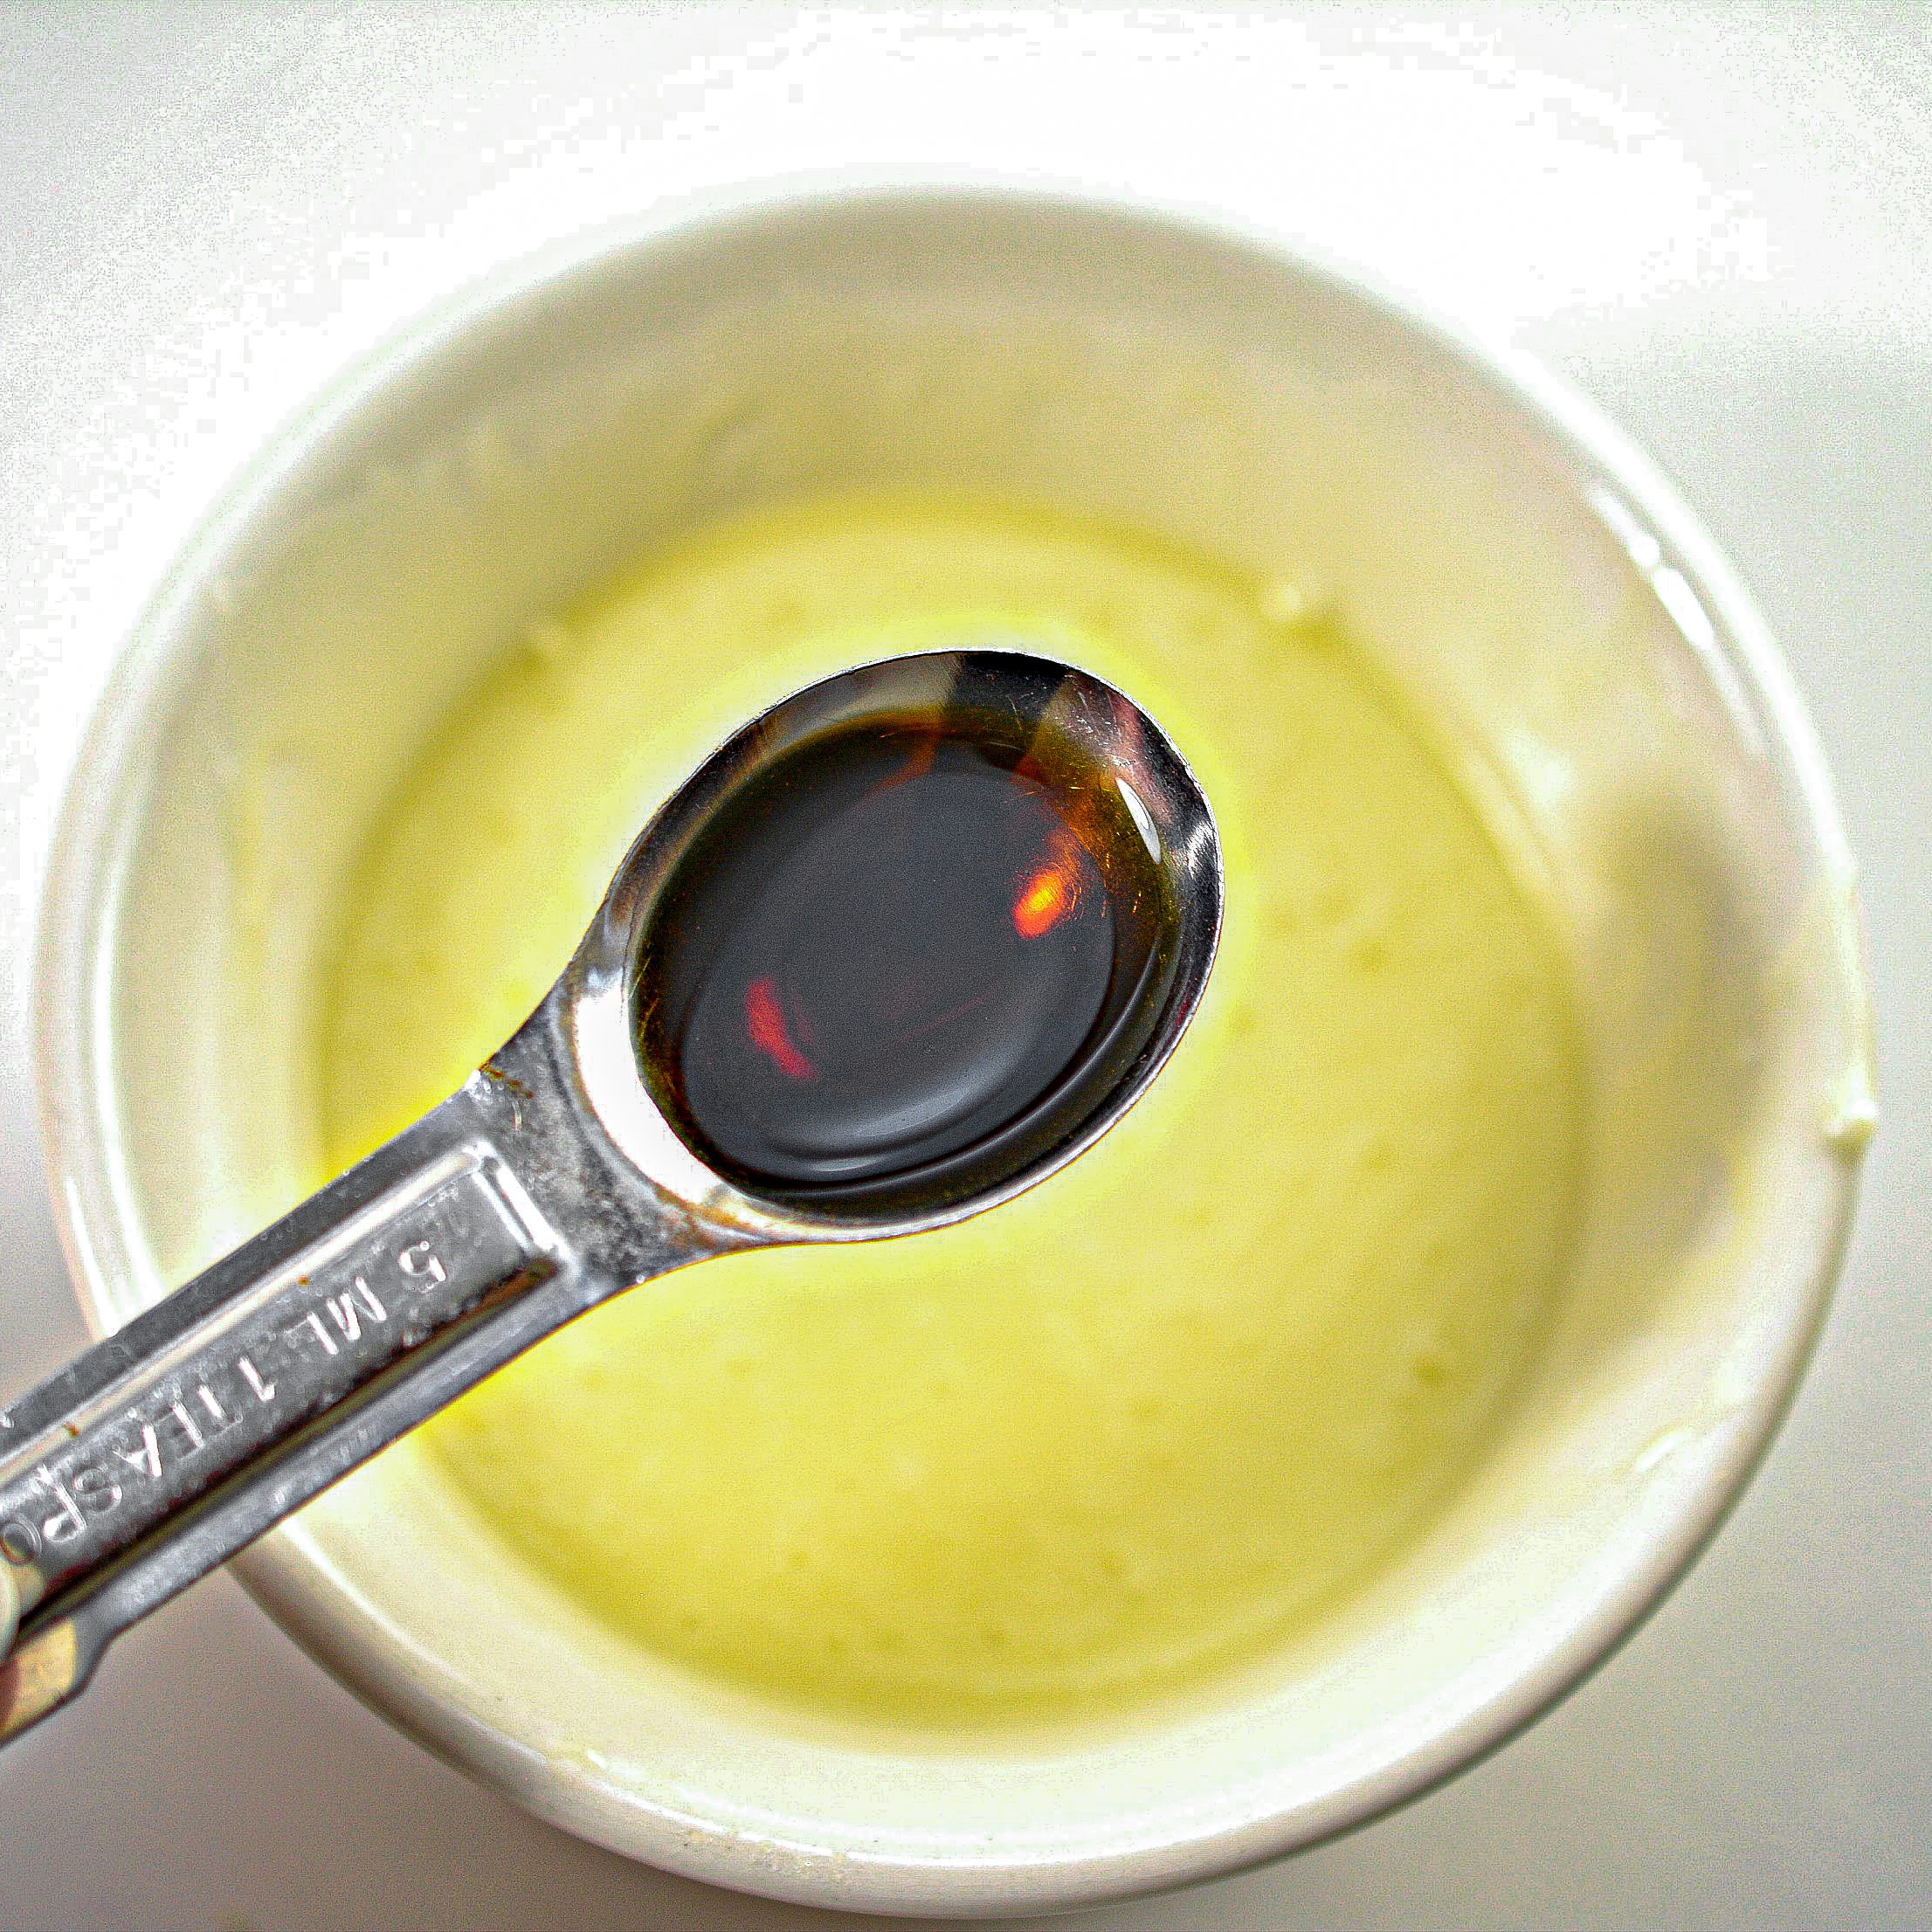 Combine the ingredients for the glaze in a bowl, and whisk until smooth and creamy.